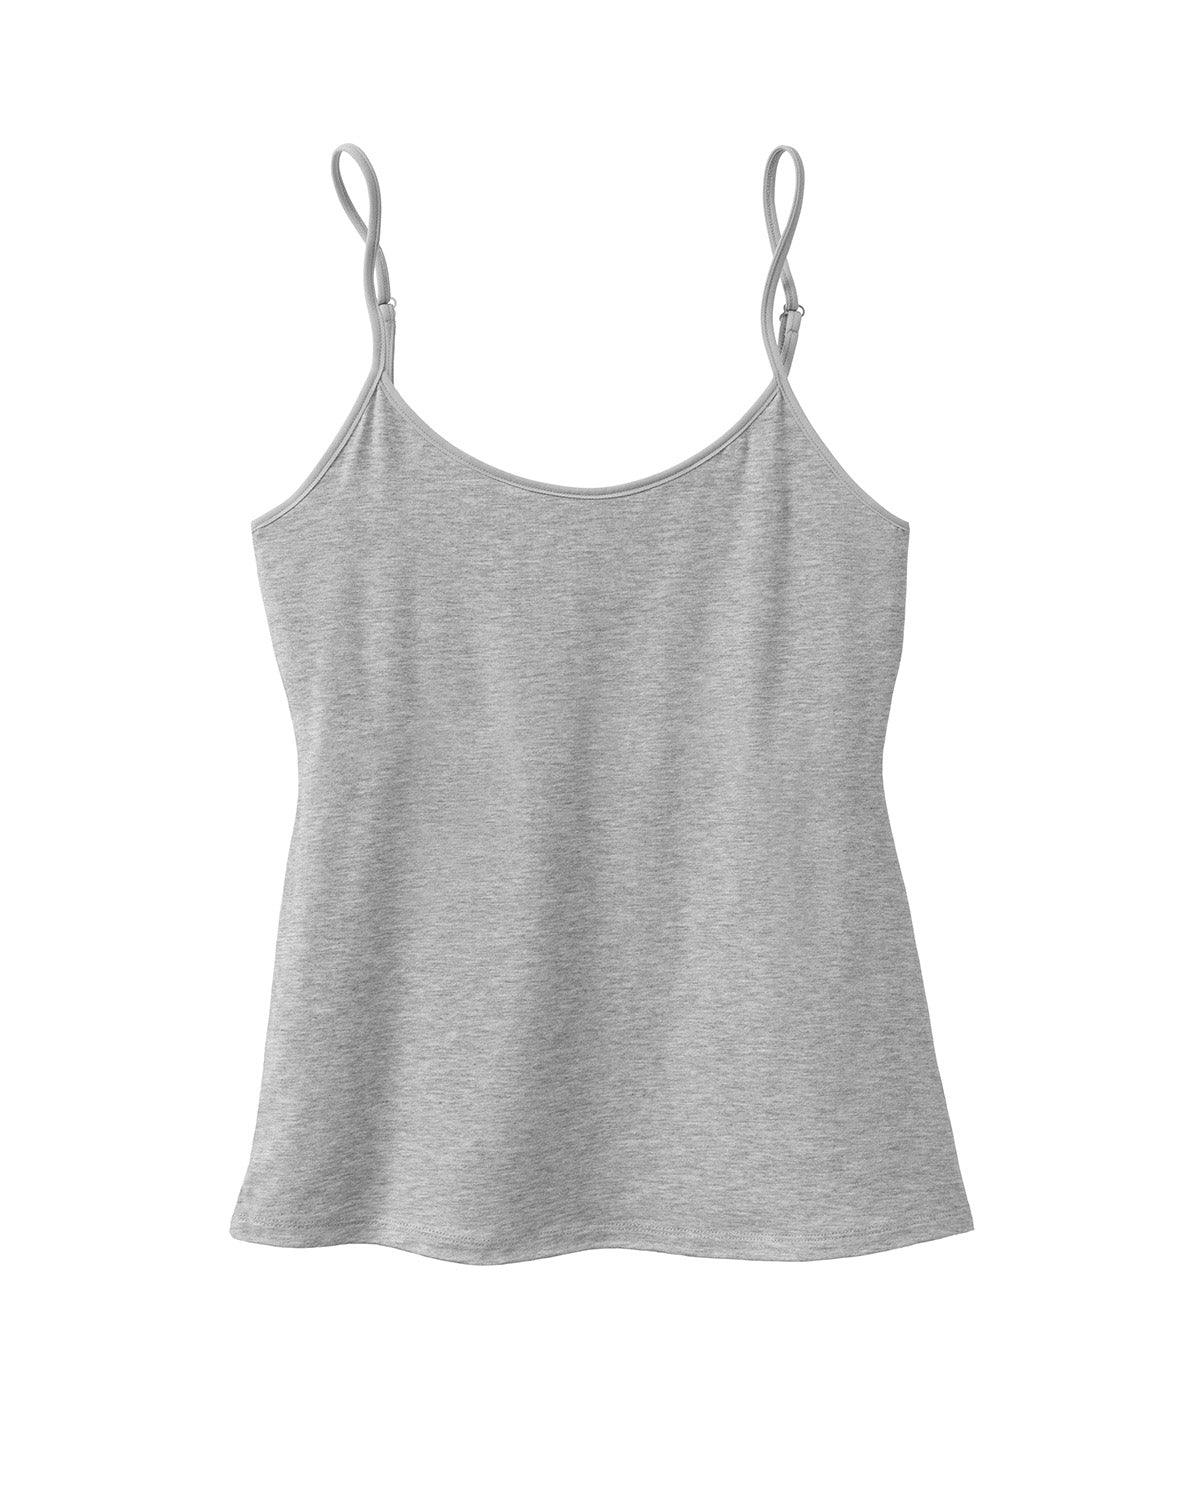 CAMI Camisole with Built in Shelf BRA Adjustable Spaghetti Strap Layer Tank  Top 